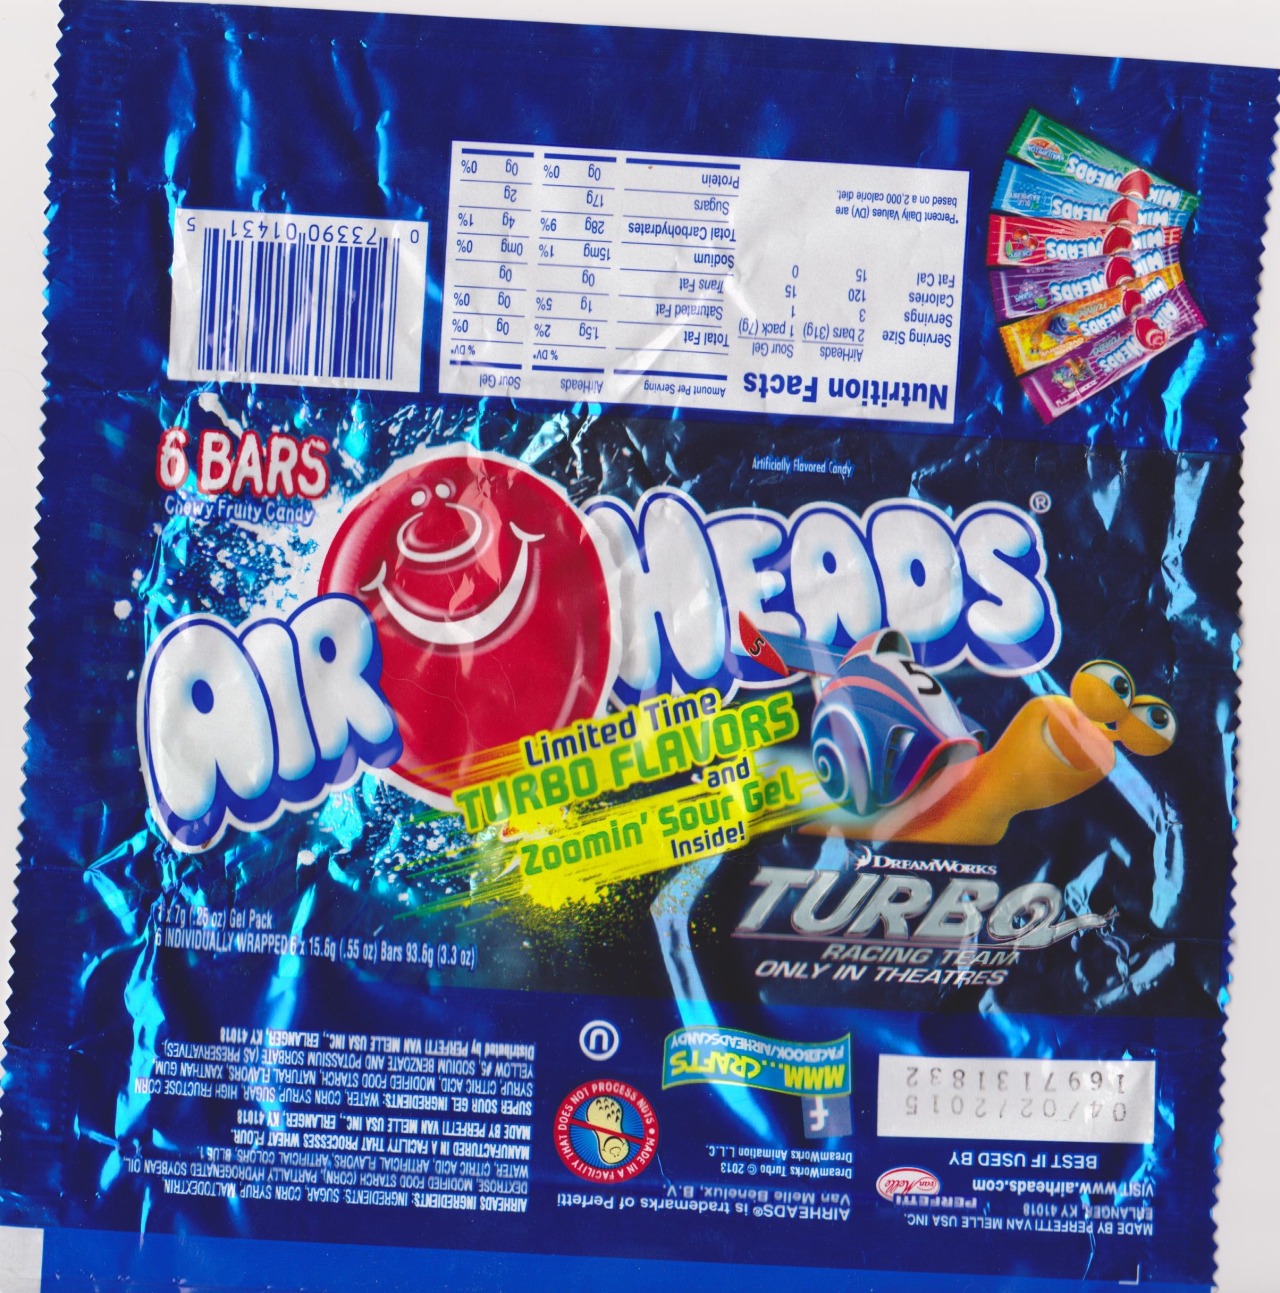 Download Candy wrappers! — Turbo Airheads with Zoomin' Sour Gel